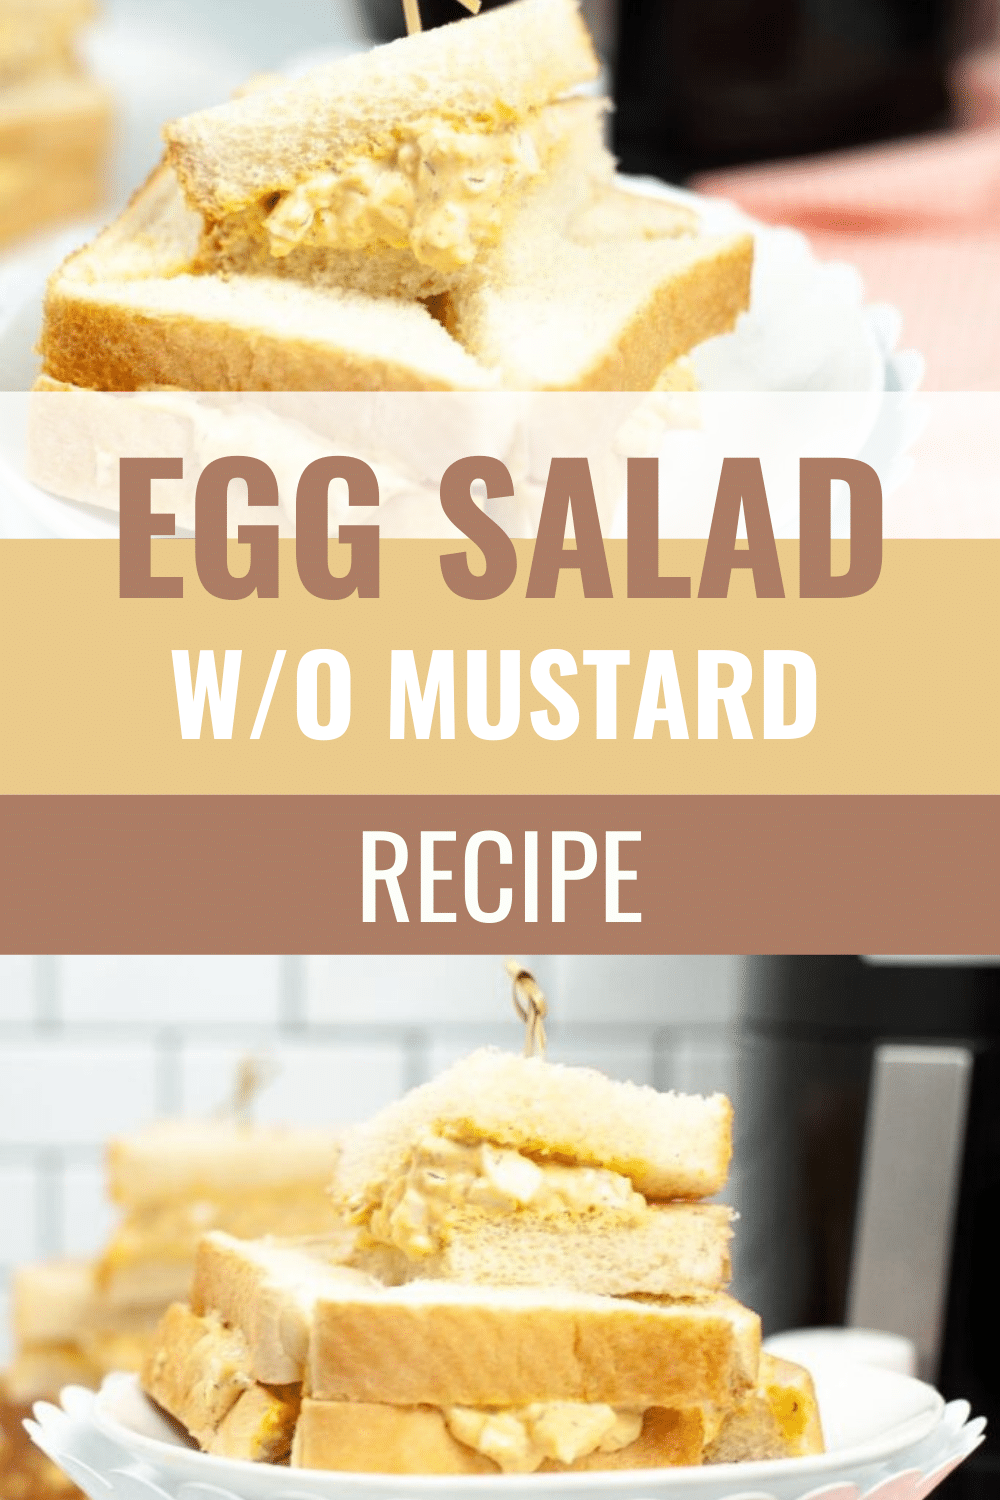 Sandwiches filled with Egg Salad Without Mustard come together quickly with Air Fryer Hard Boiled Eggs. Lots of flavor but not too spicy! #airfryer #eggsalad #lunchrecipe #hardboiledeggs via @wondermomwannab